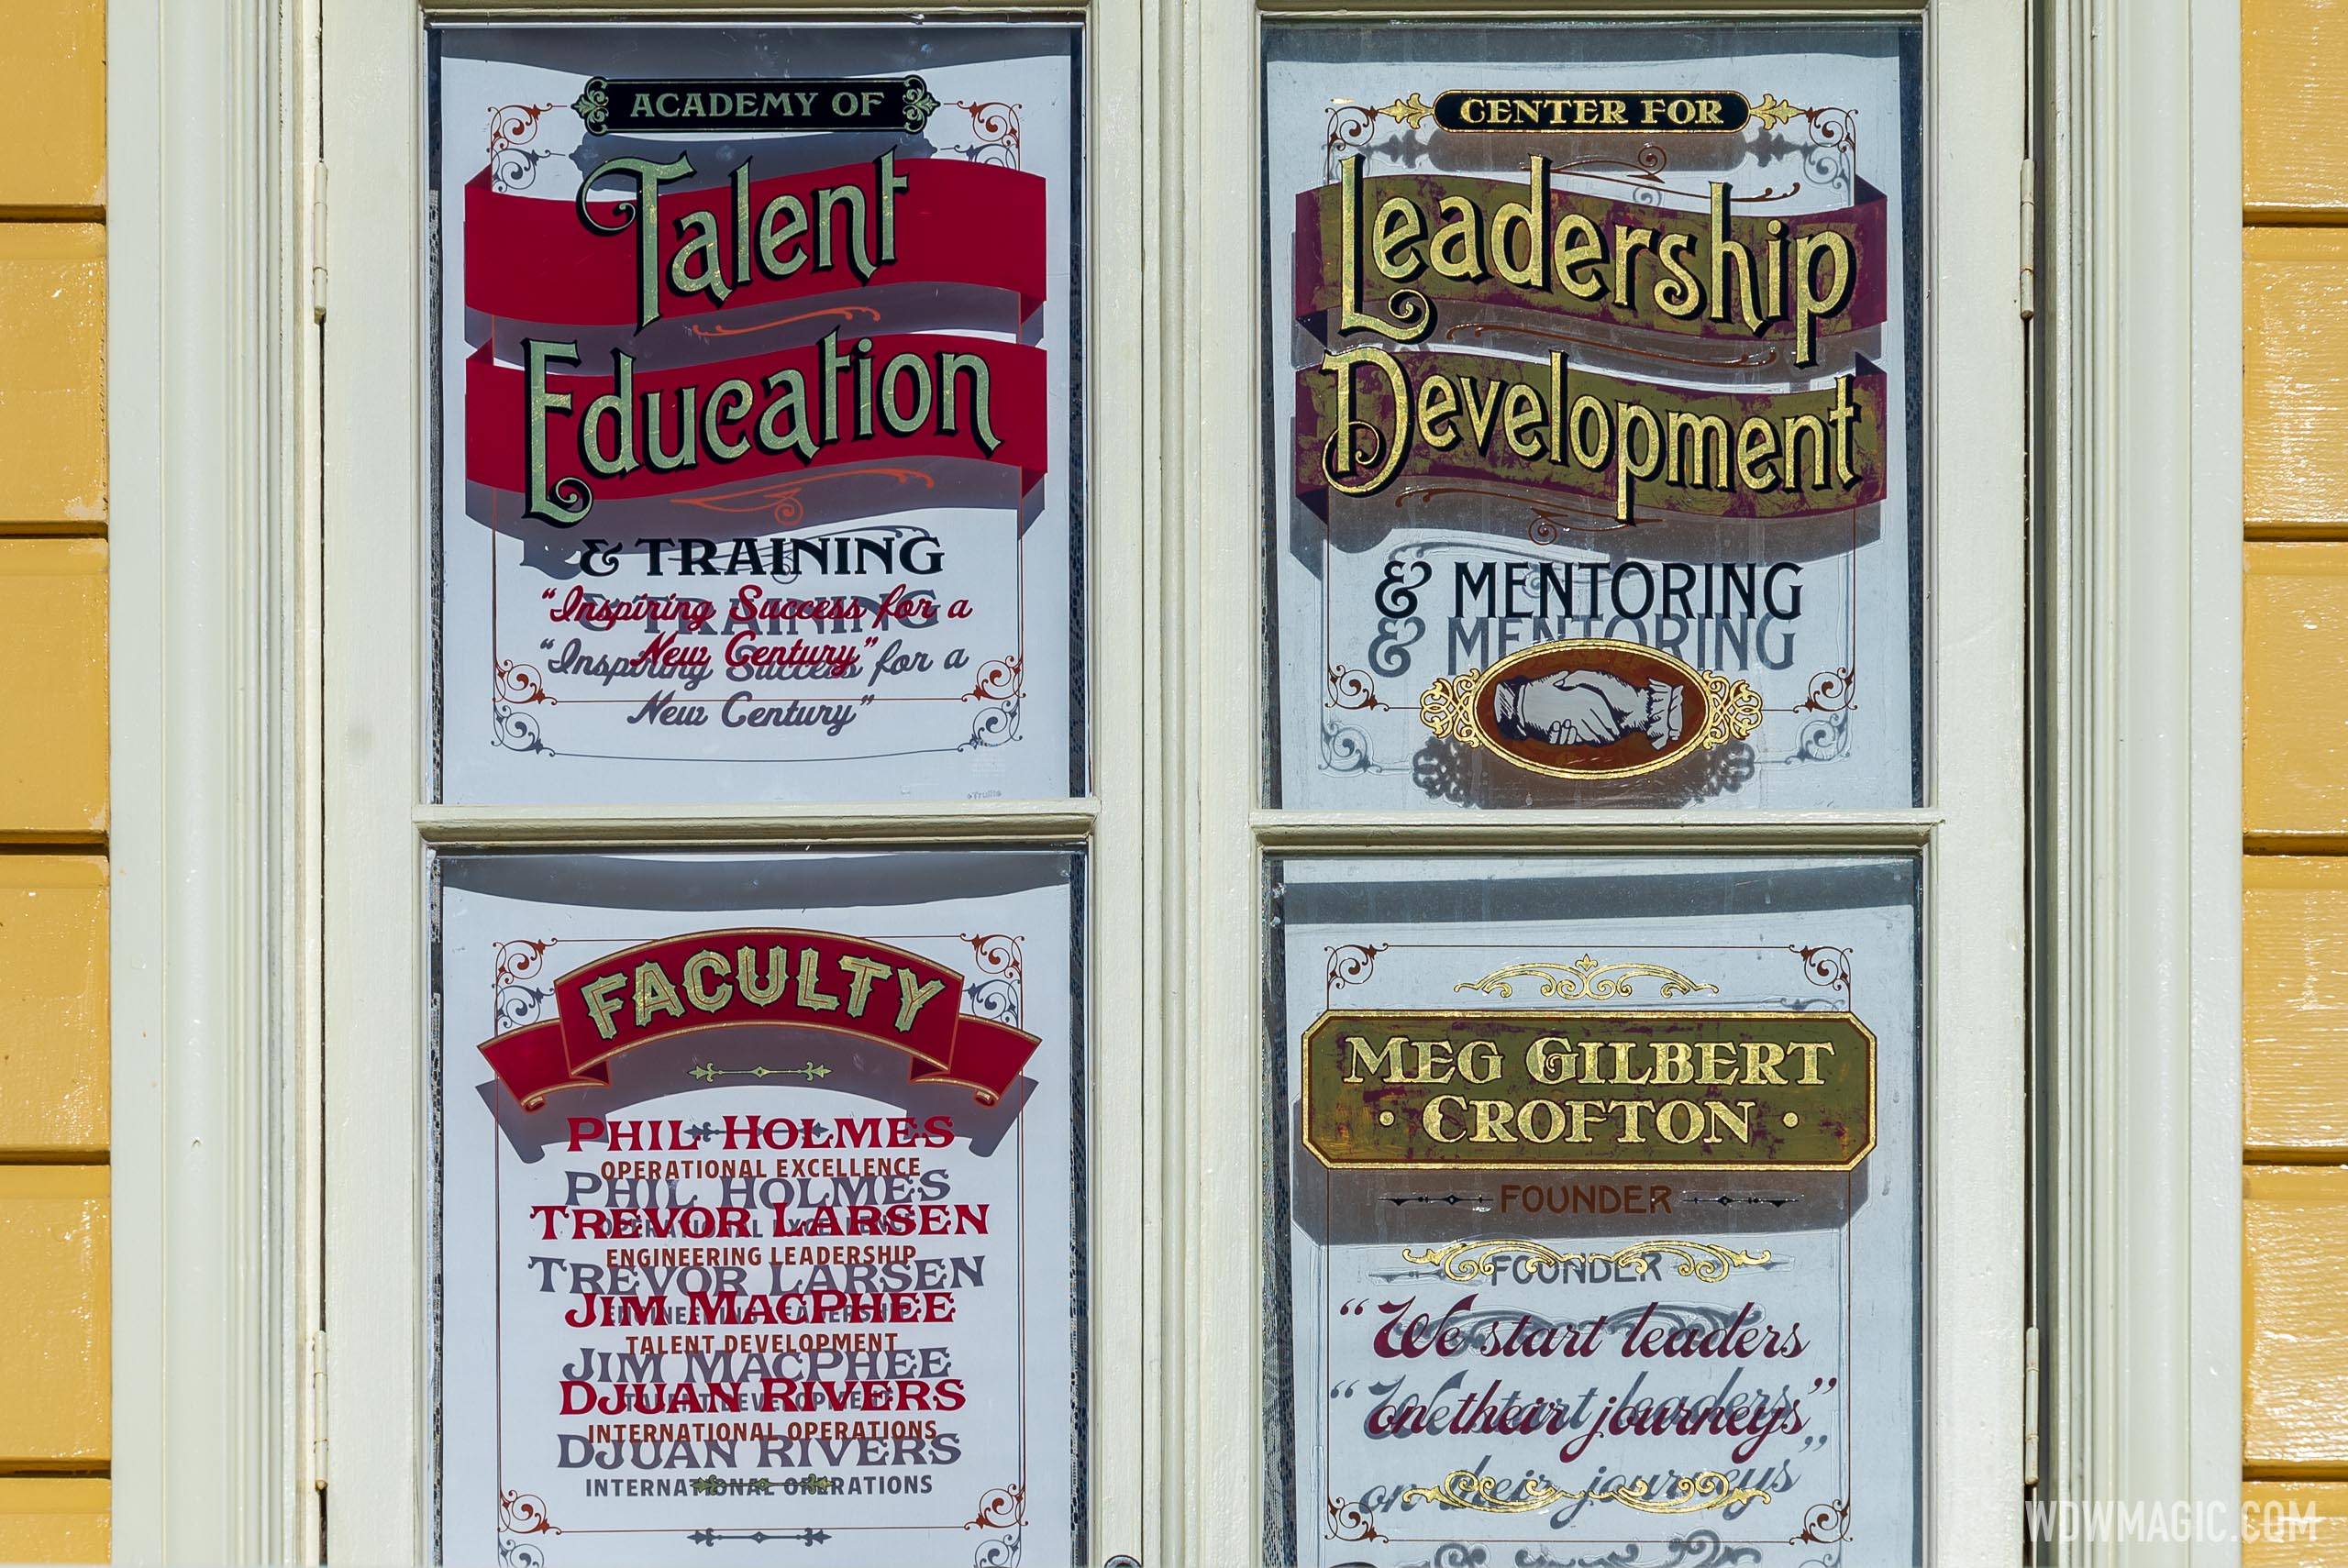 Disney honors four retired leaders with a window on Main Street U.S.A. at Magic Kingdom